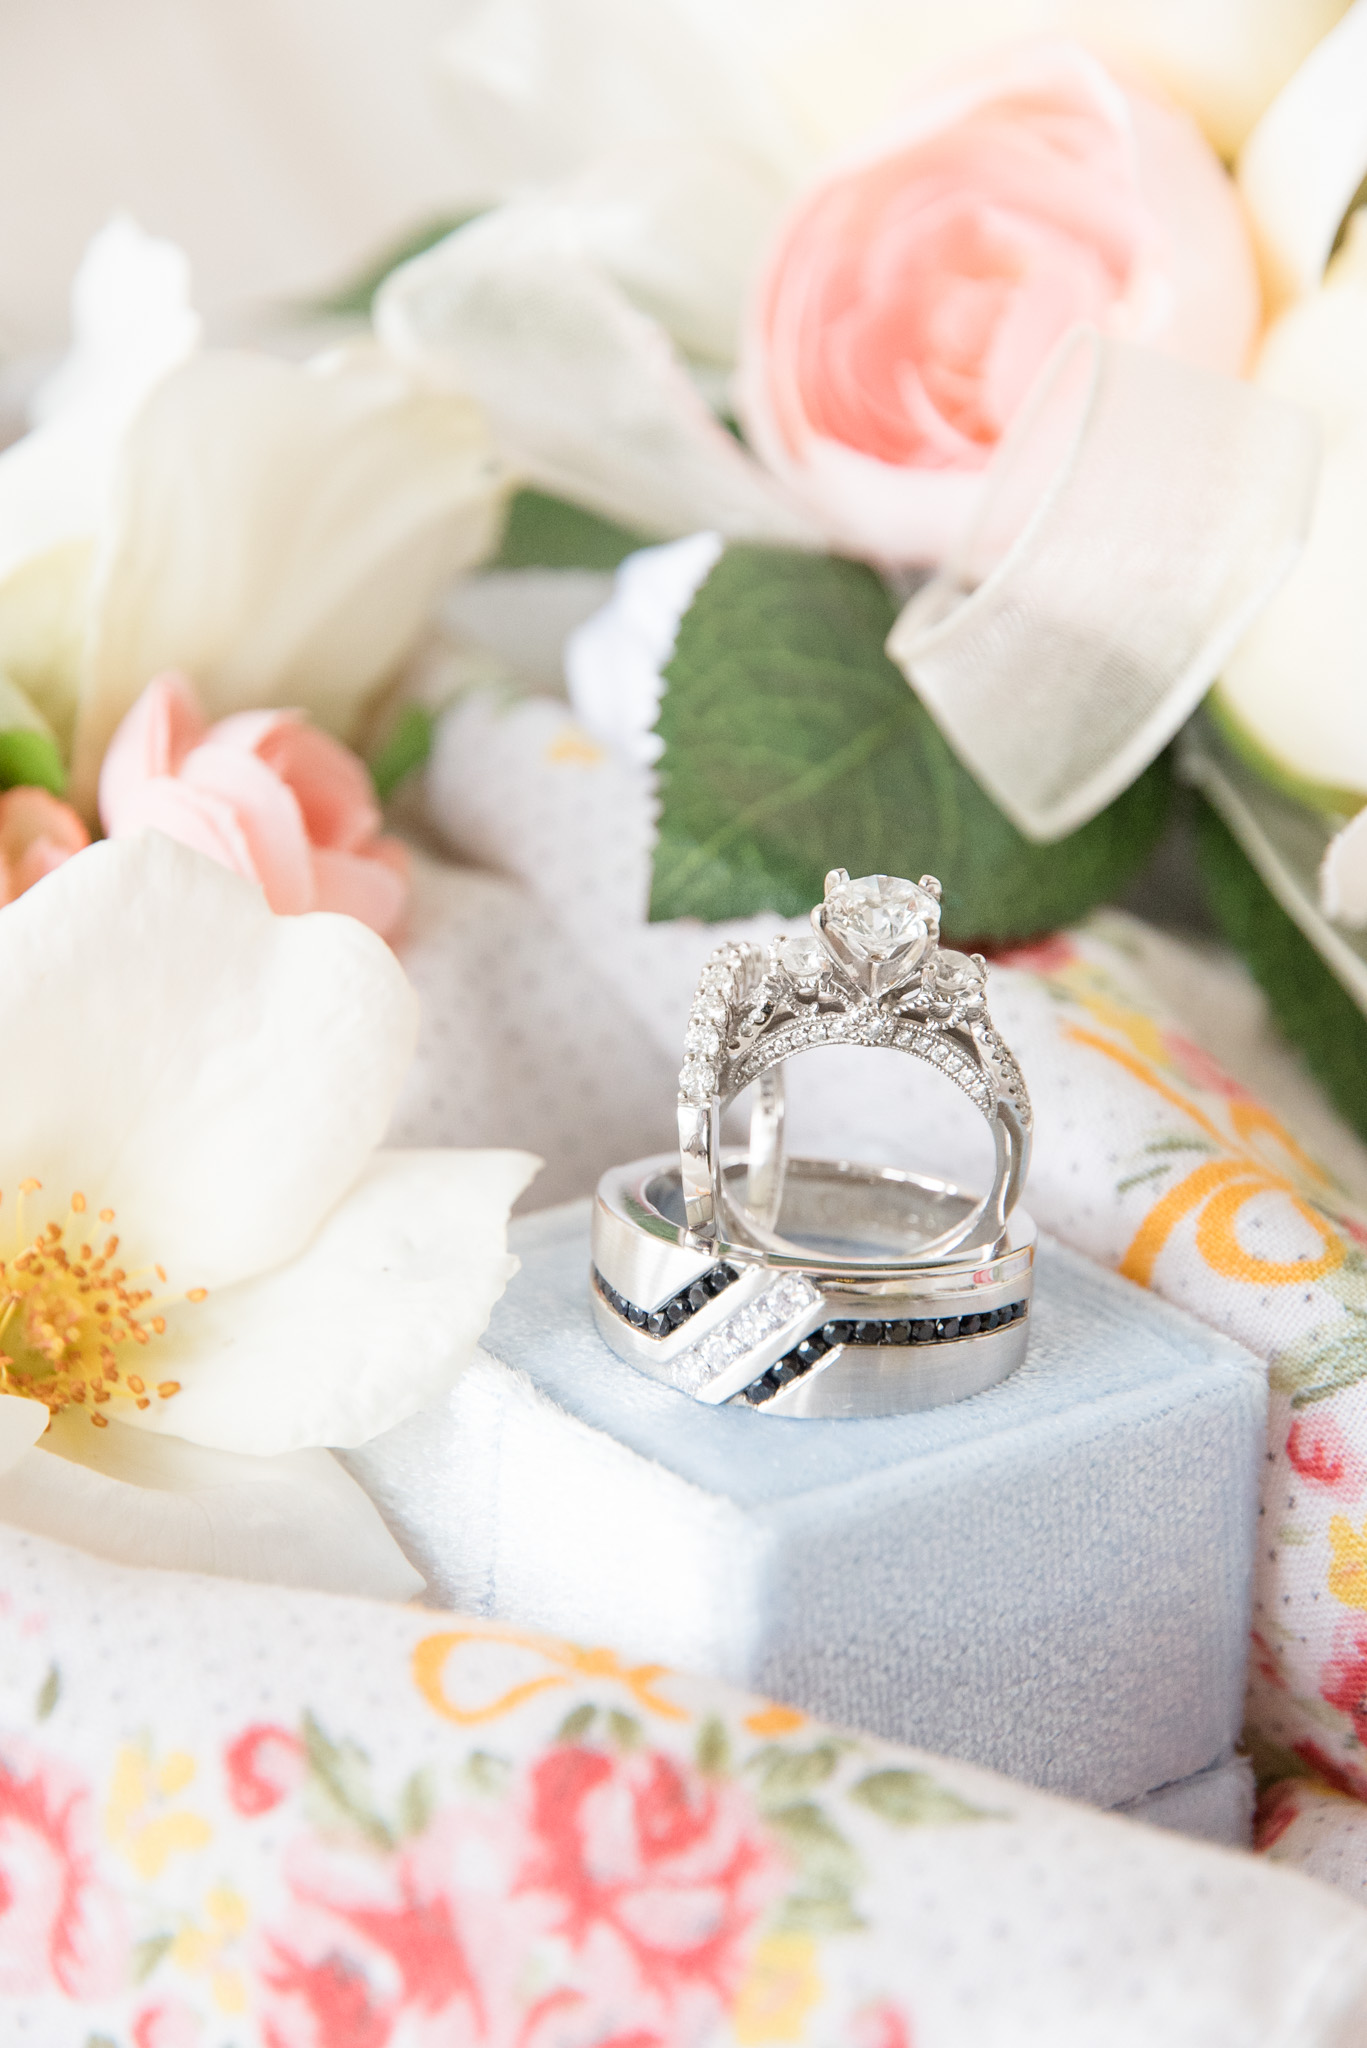 Engagement ring stand on other rings.